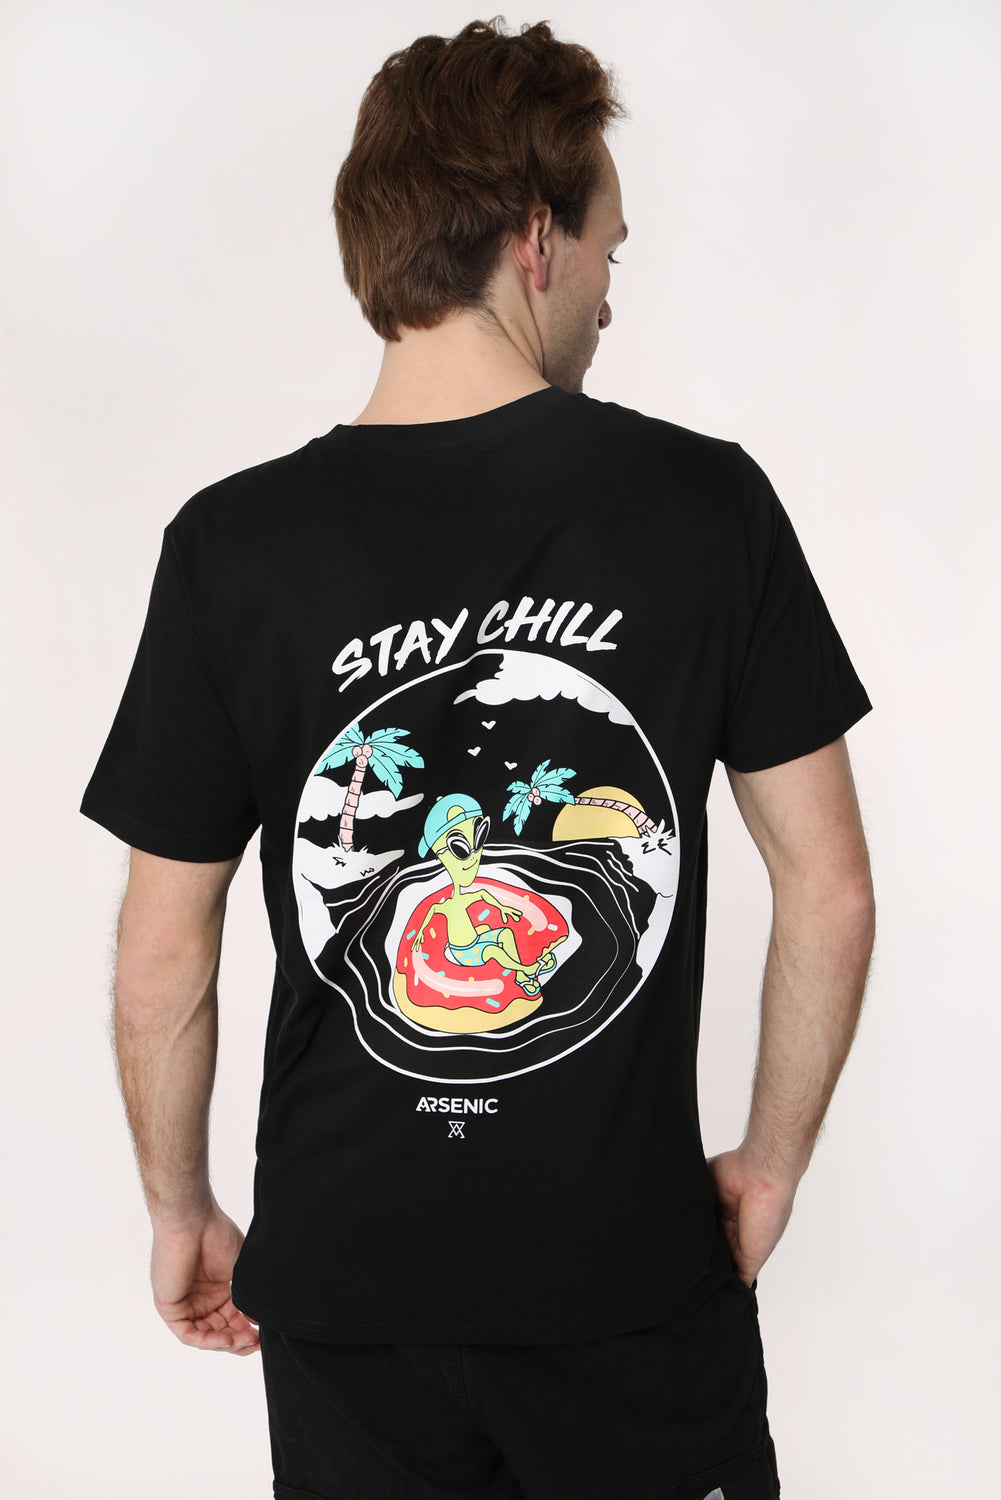 T-Shirt Imprimé Stay Chill Arsenic Homme T-Shirt Imprimé Stay Chill Arsenic Homme